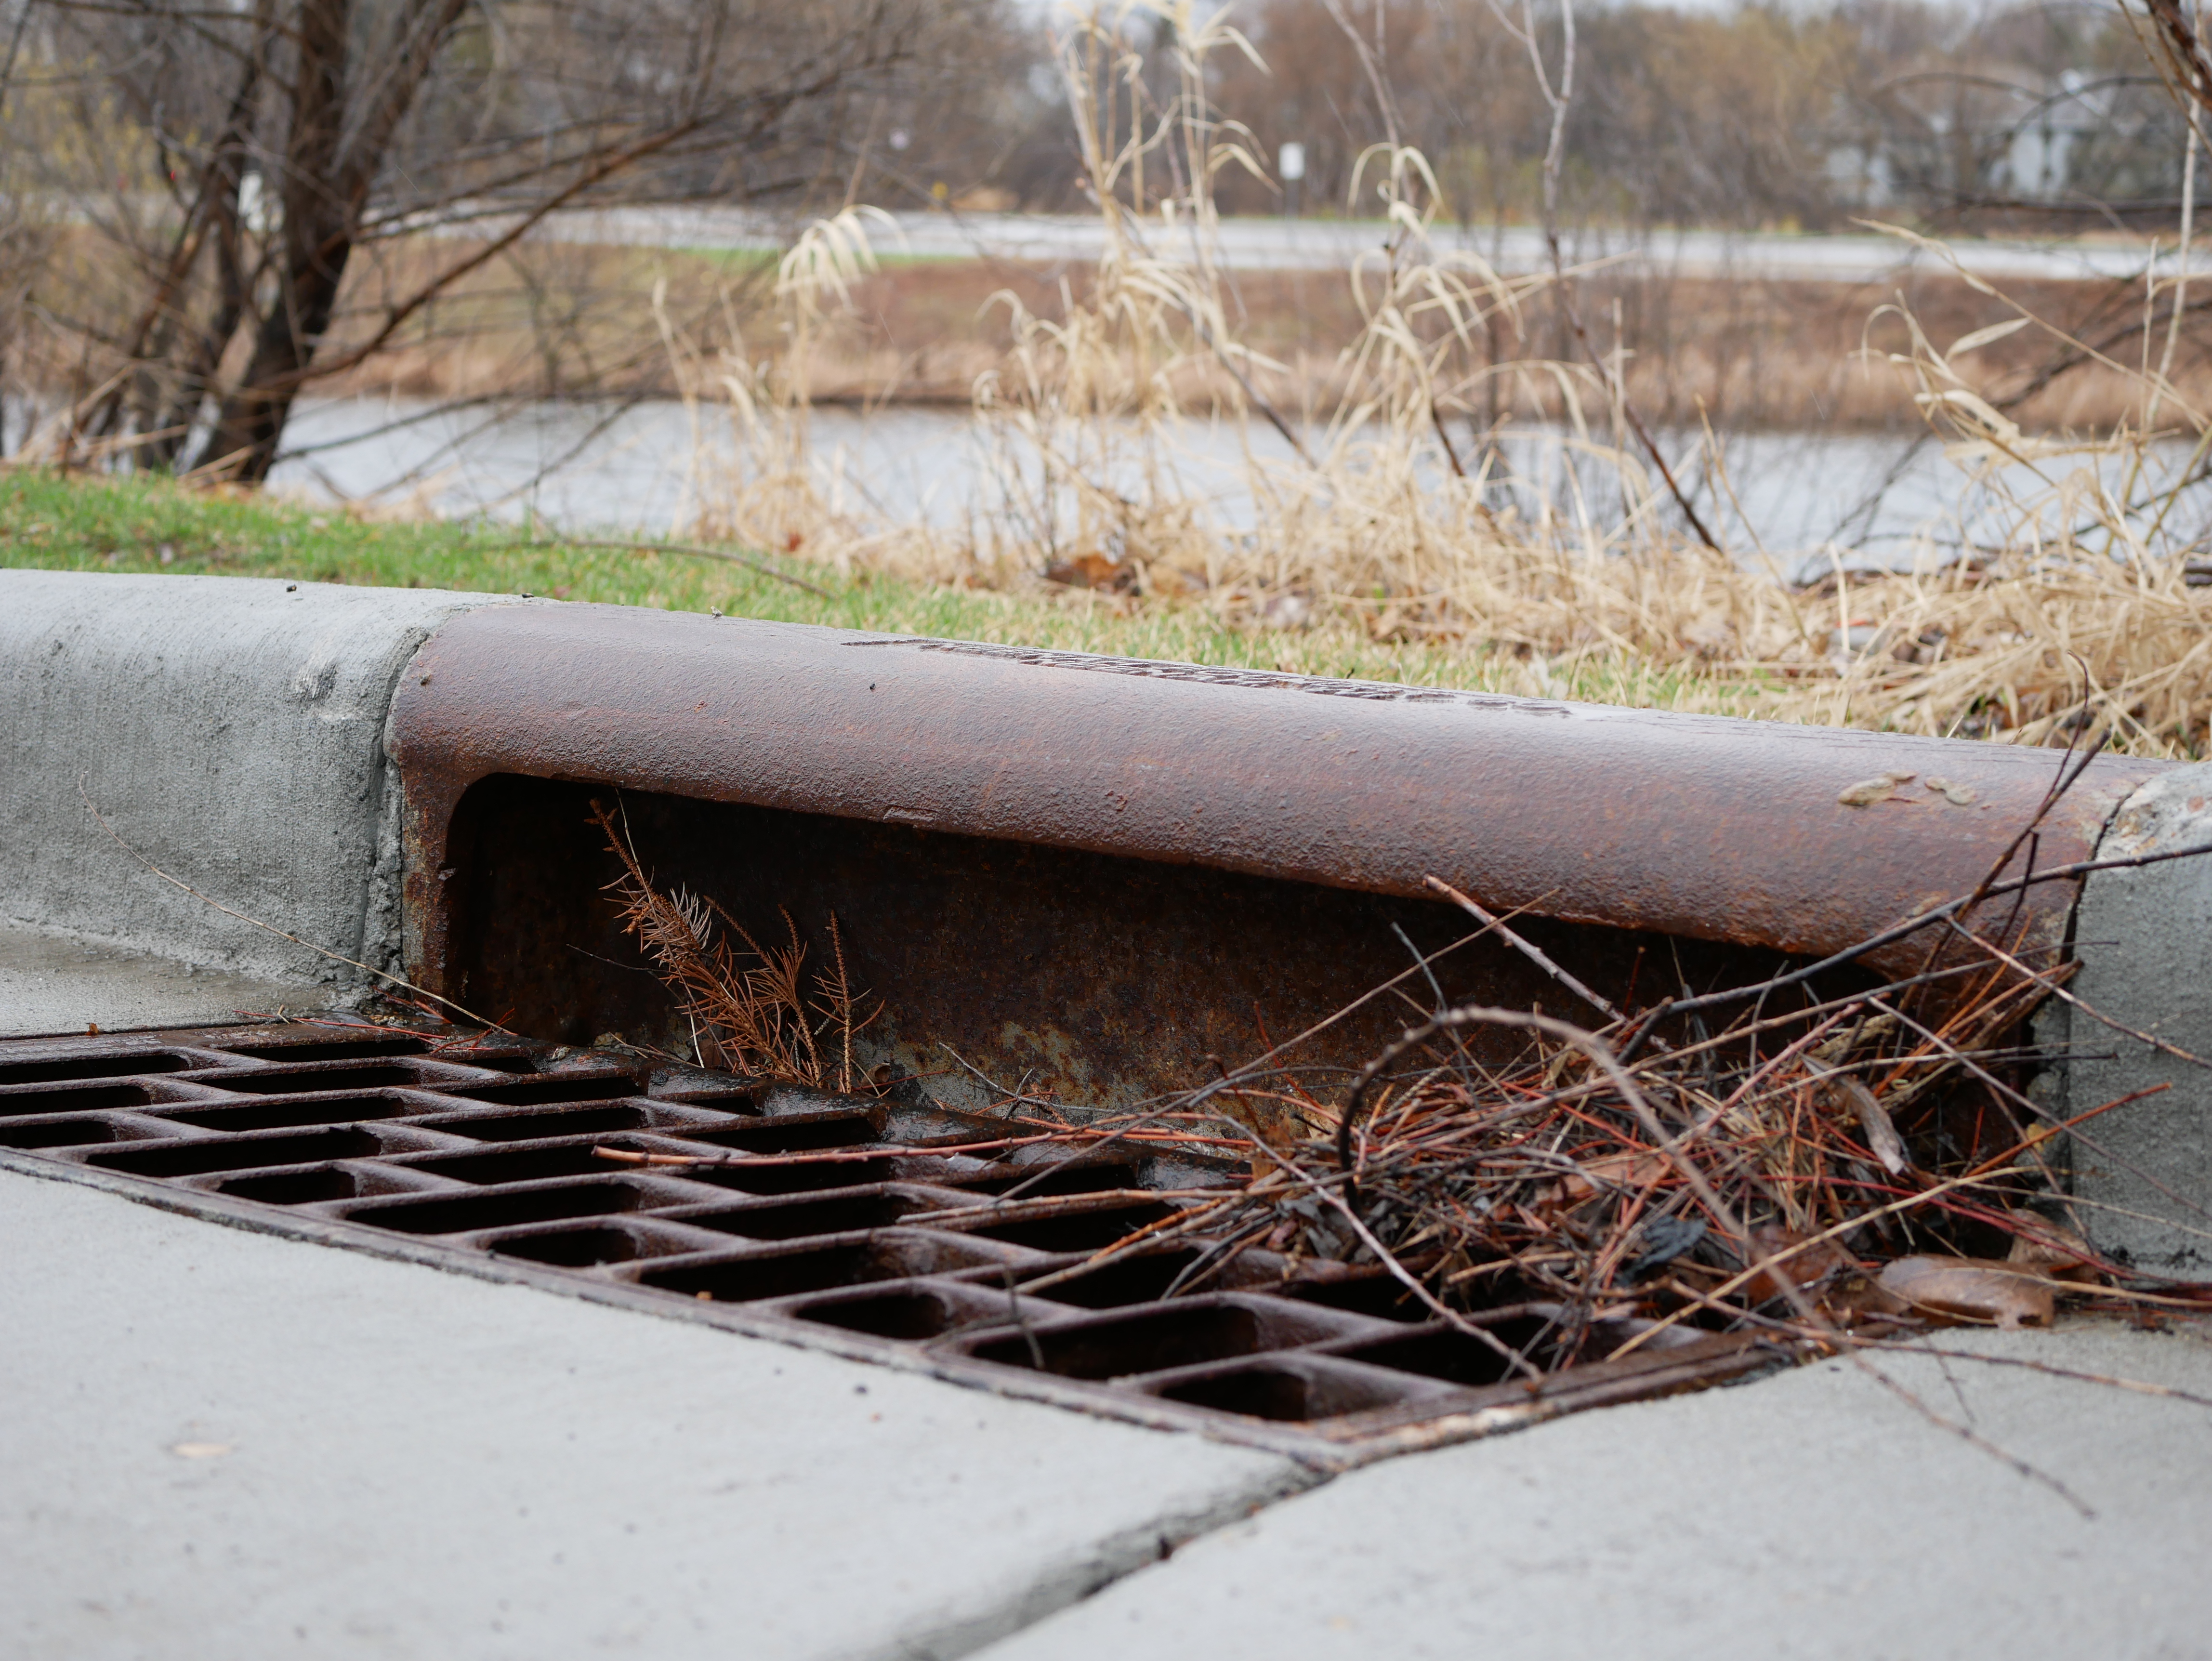 District office_2019Apr22_Storm drain with debris and pond in the background.JPG